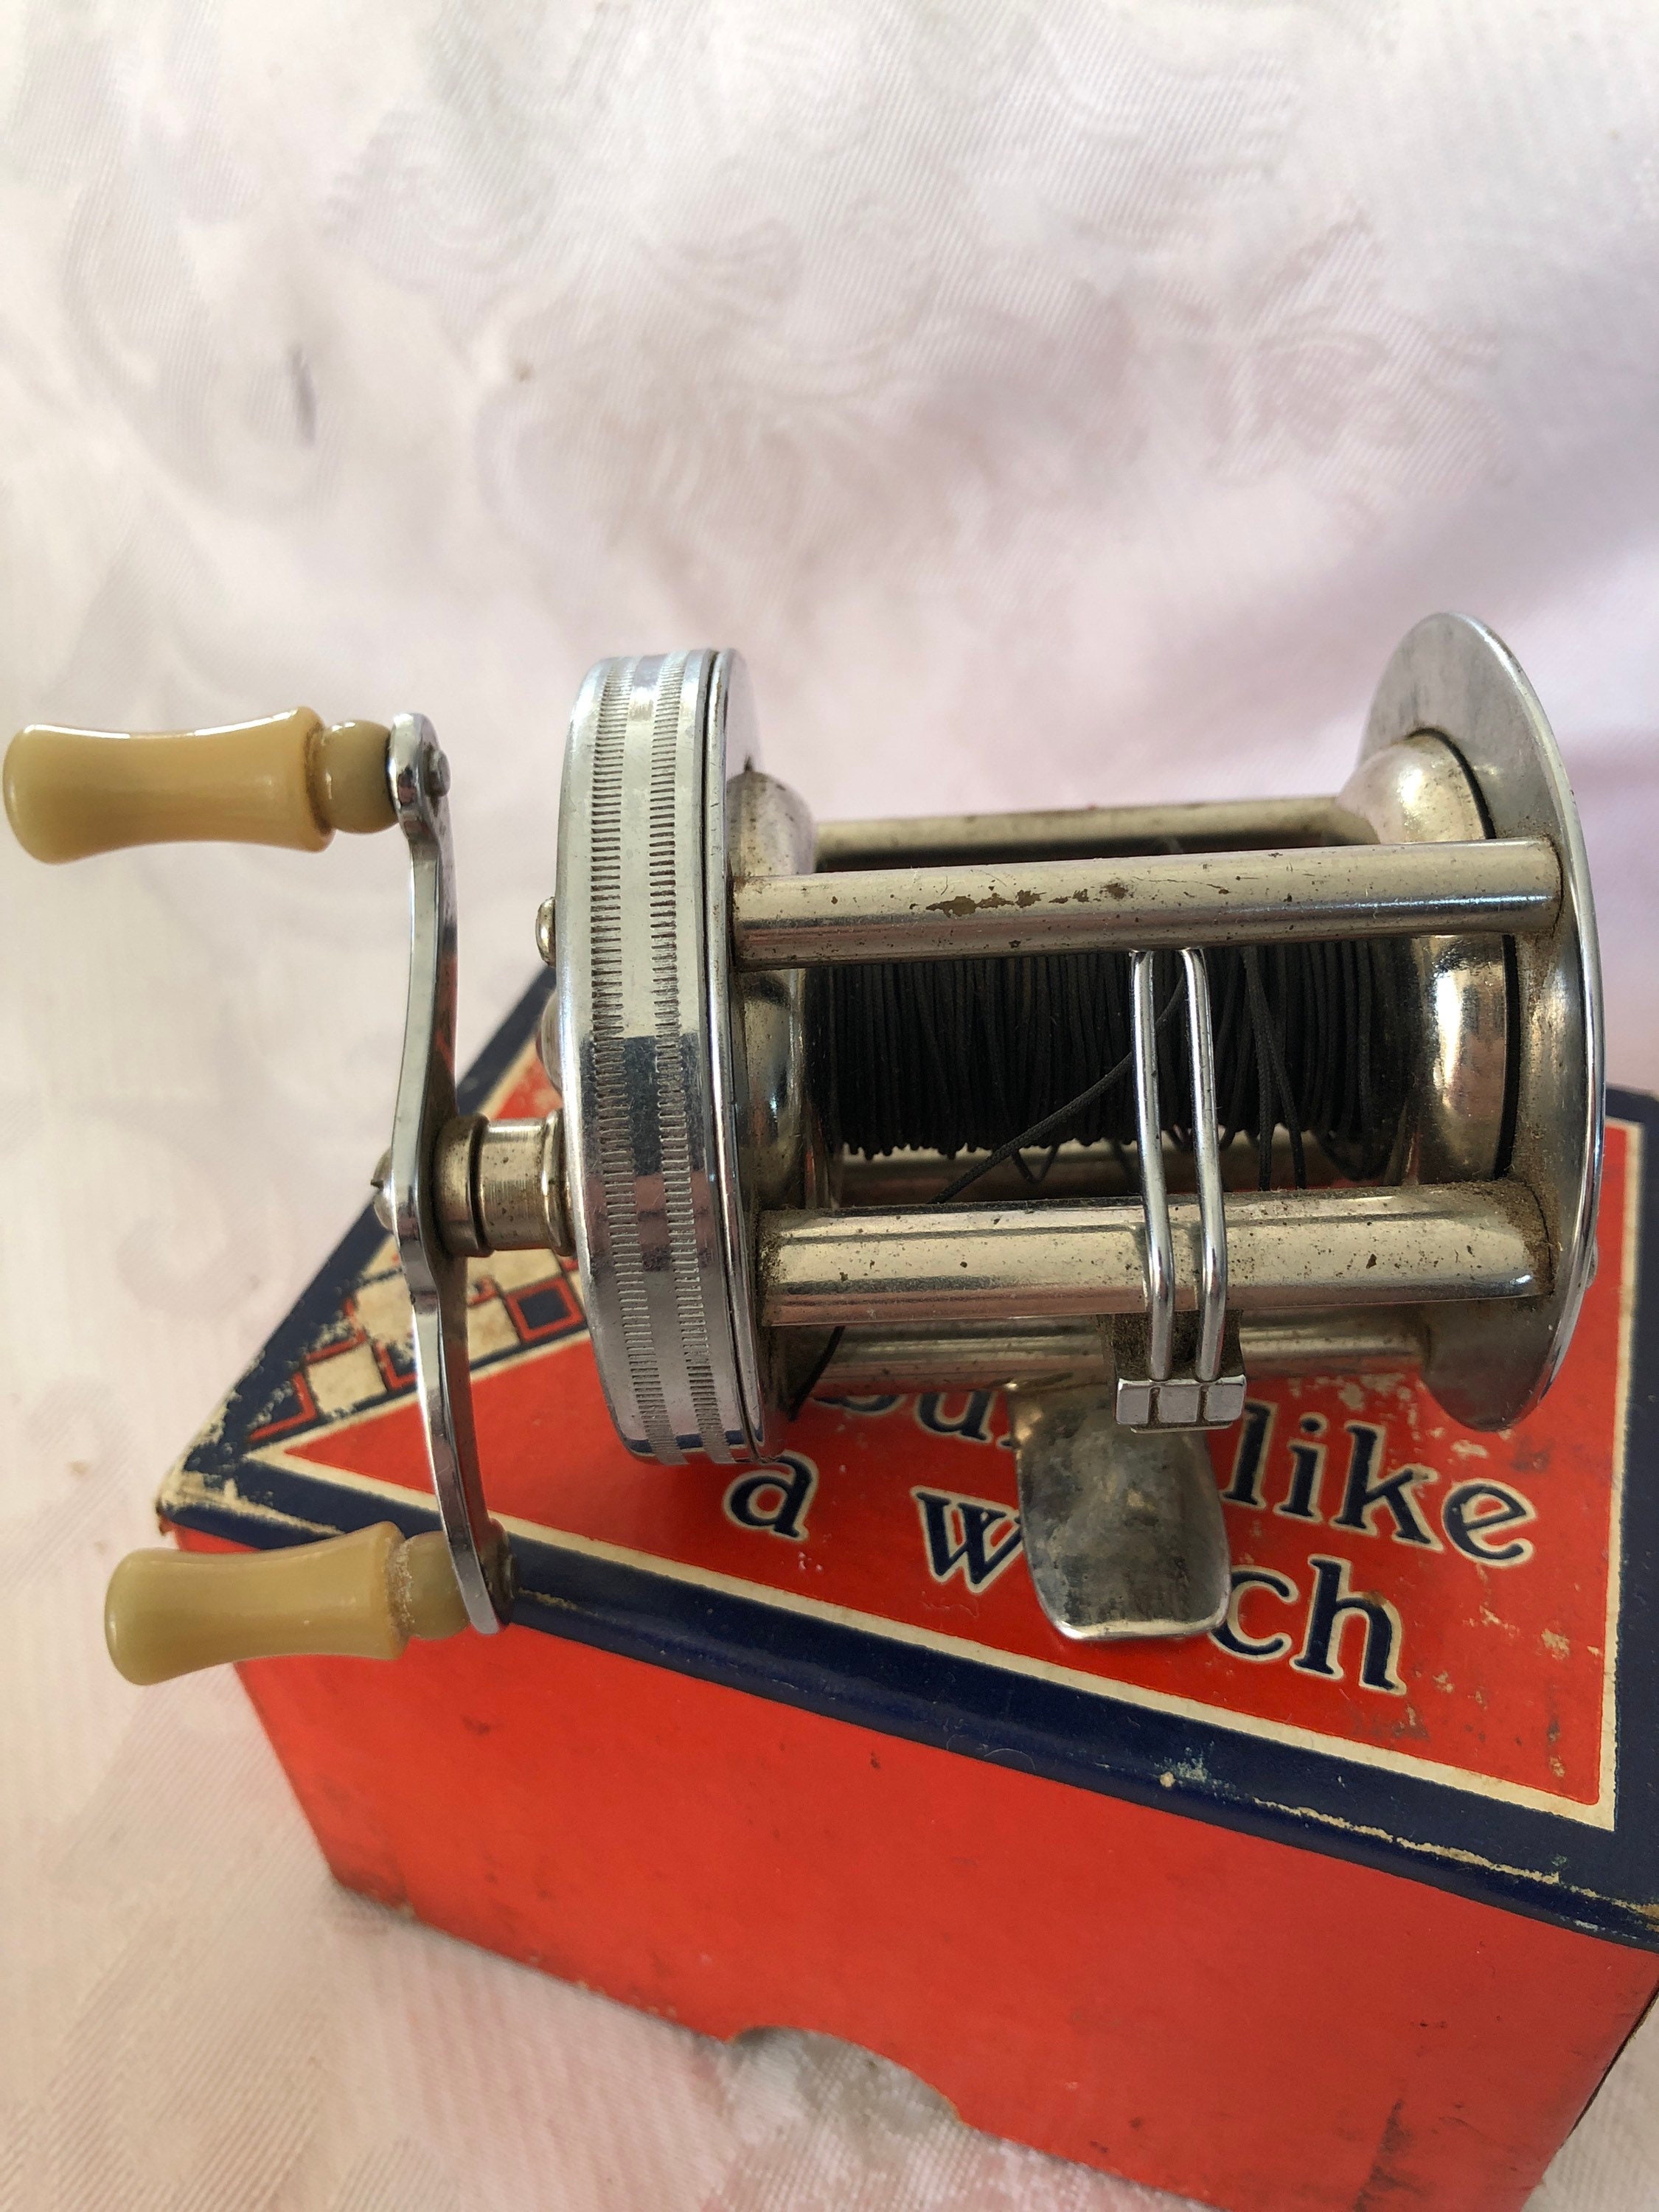 Vintage Shakespeare Level Winding Reel Date1956 Toronto by Inglis. Preowned  Good Condition. Original Box a Fantastic Fishing Display Reel. 